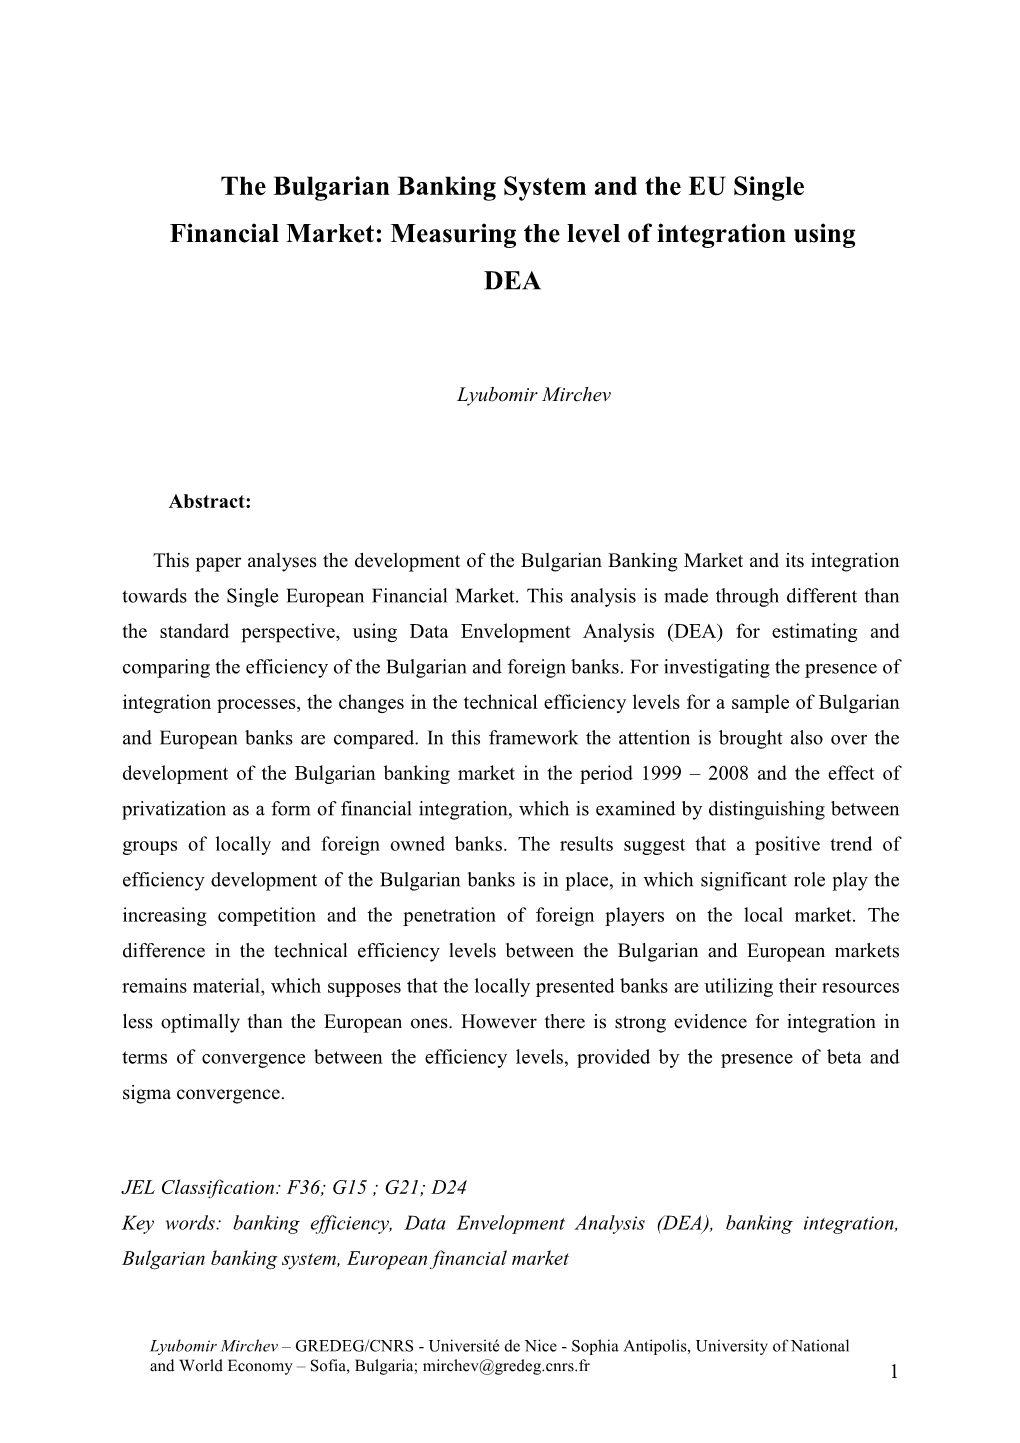 The Bulgarian Banking System and the EU Single Financial Market: Measuring the Level of Integration Using DEA